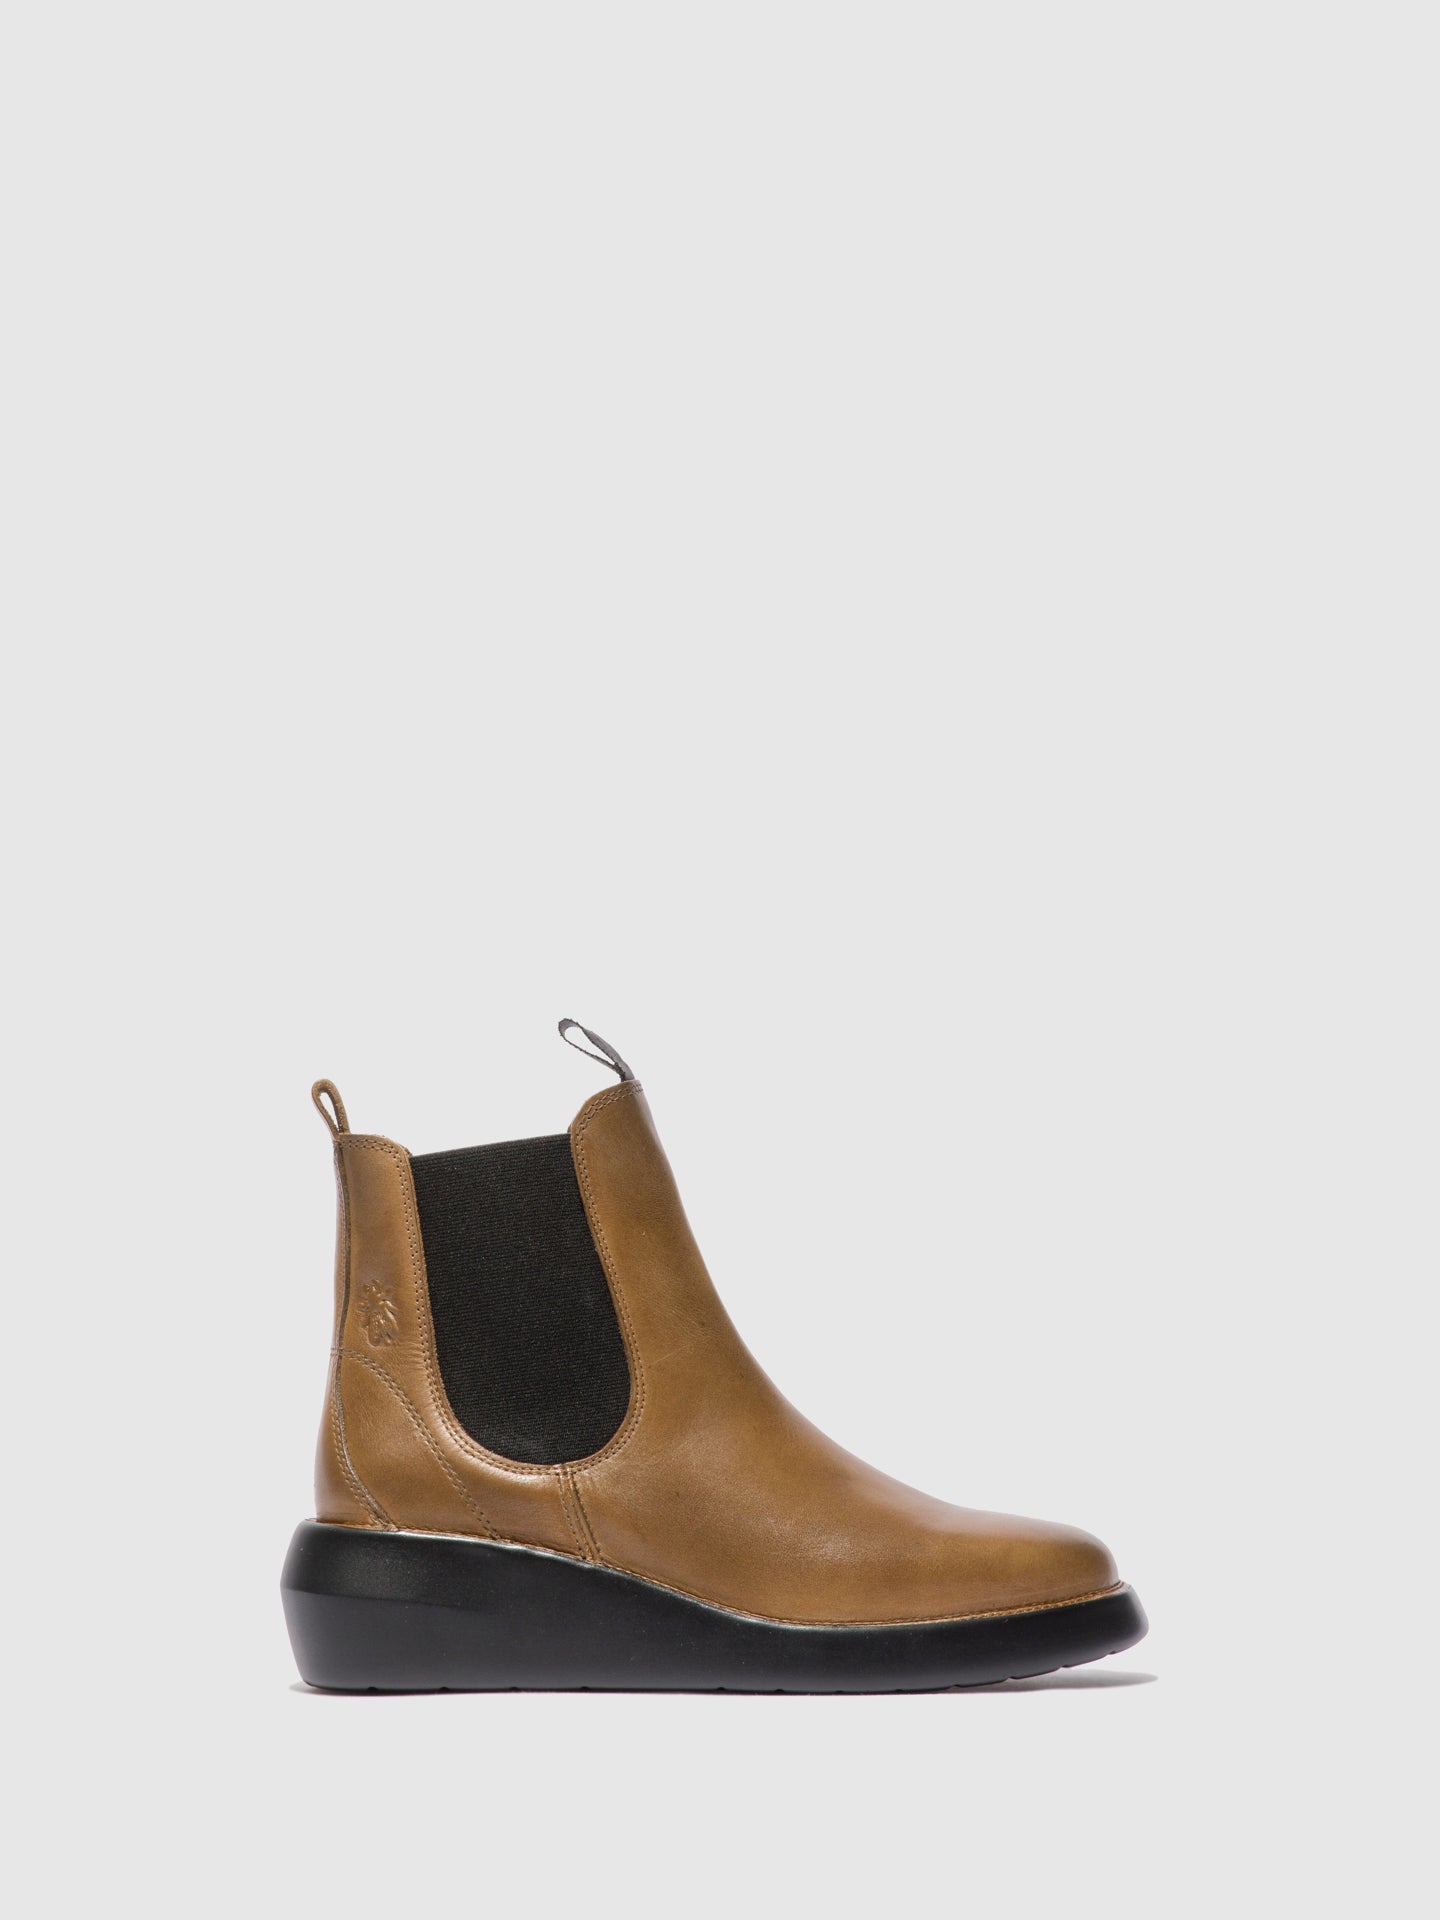 Fly London Chelsea Ankle Boots BETY502FLY RUG CAMEL